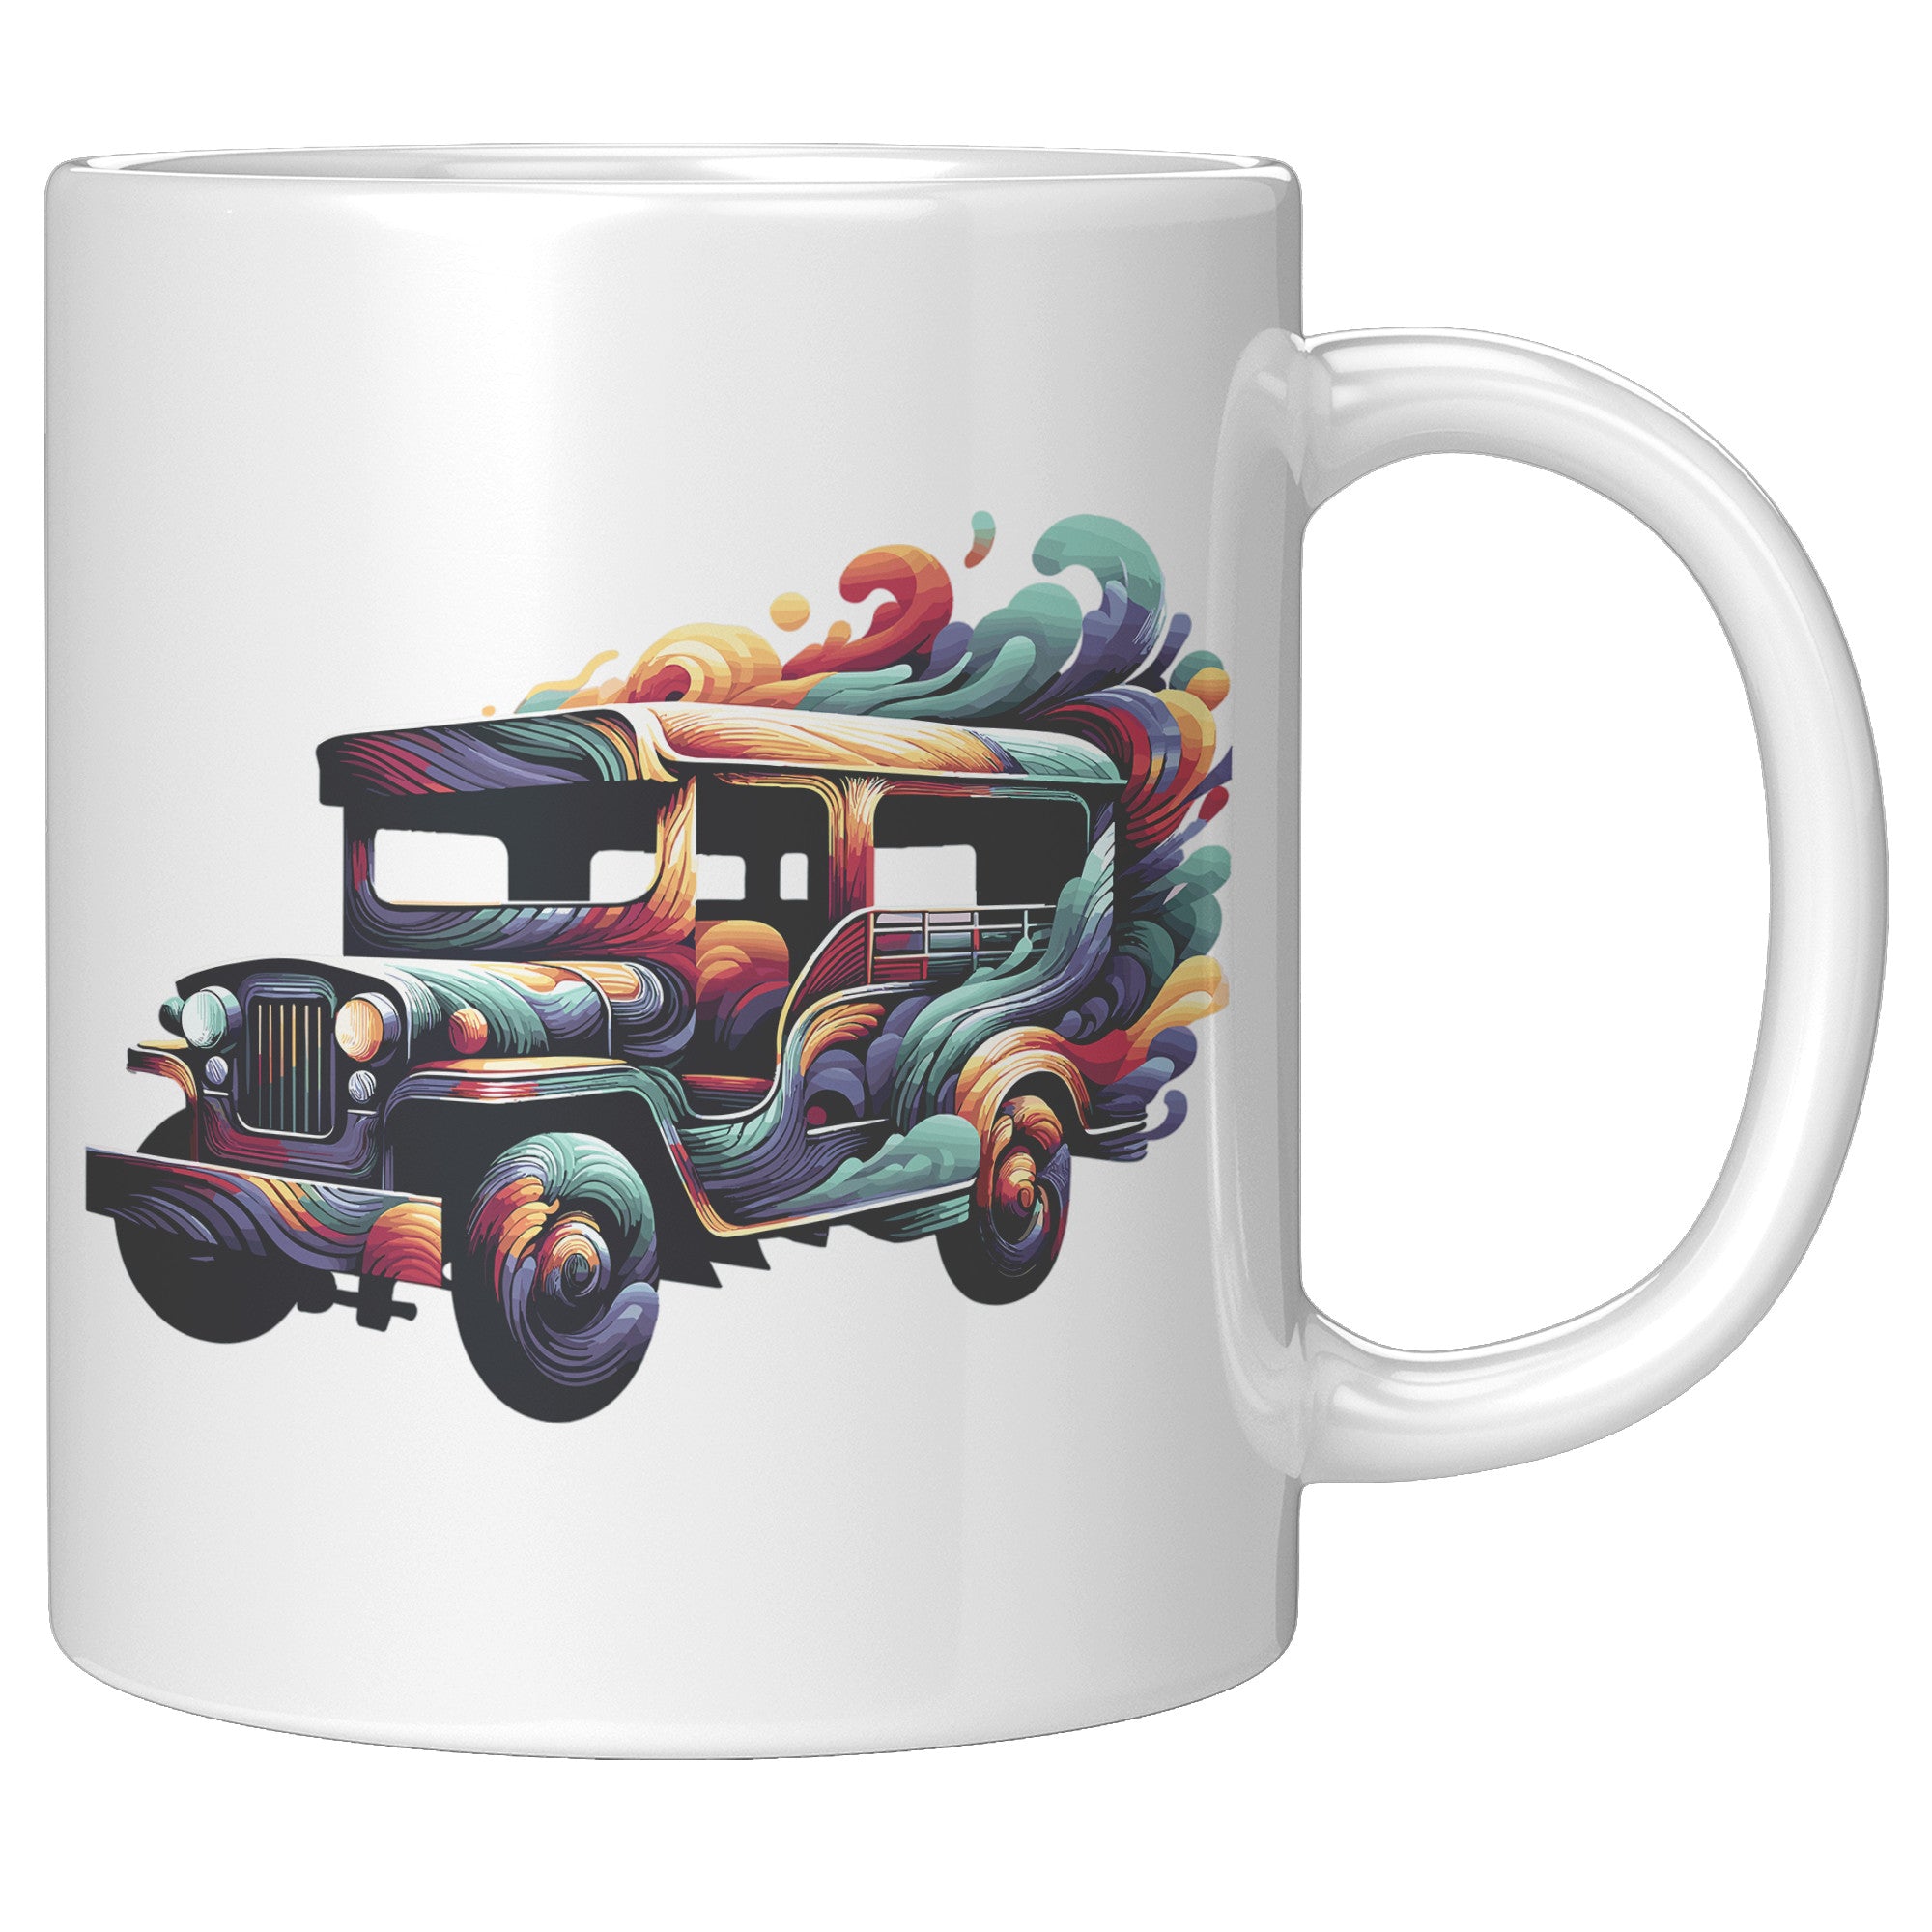 Iconic Jeepney Coffee Mug - Celebrate Filipino Culture - Unique Philippines-Inspired Cup - Perfect Gift for Pinoy Pride! - L